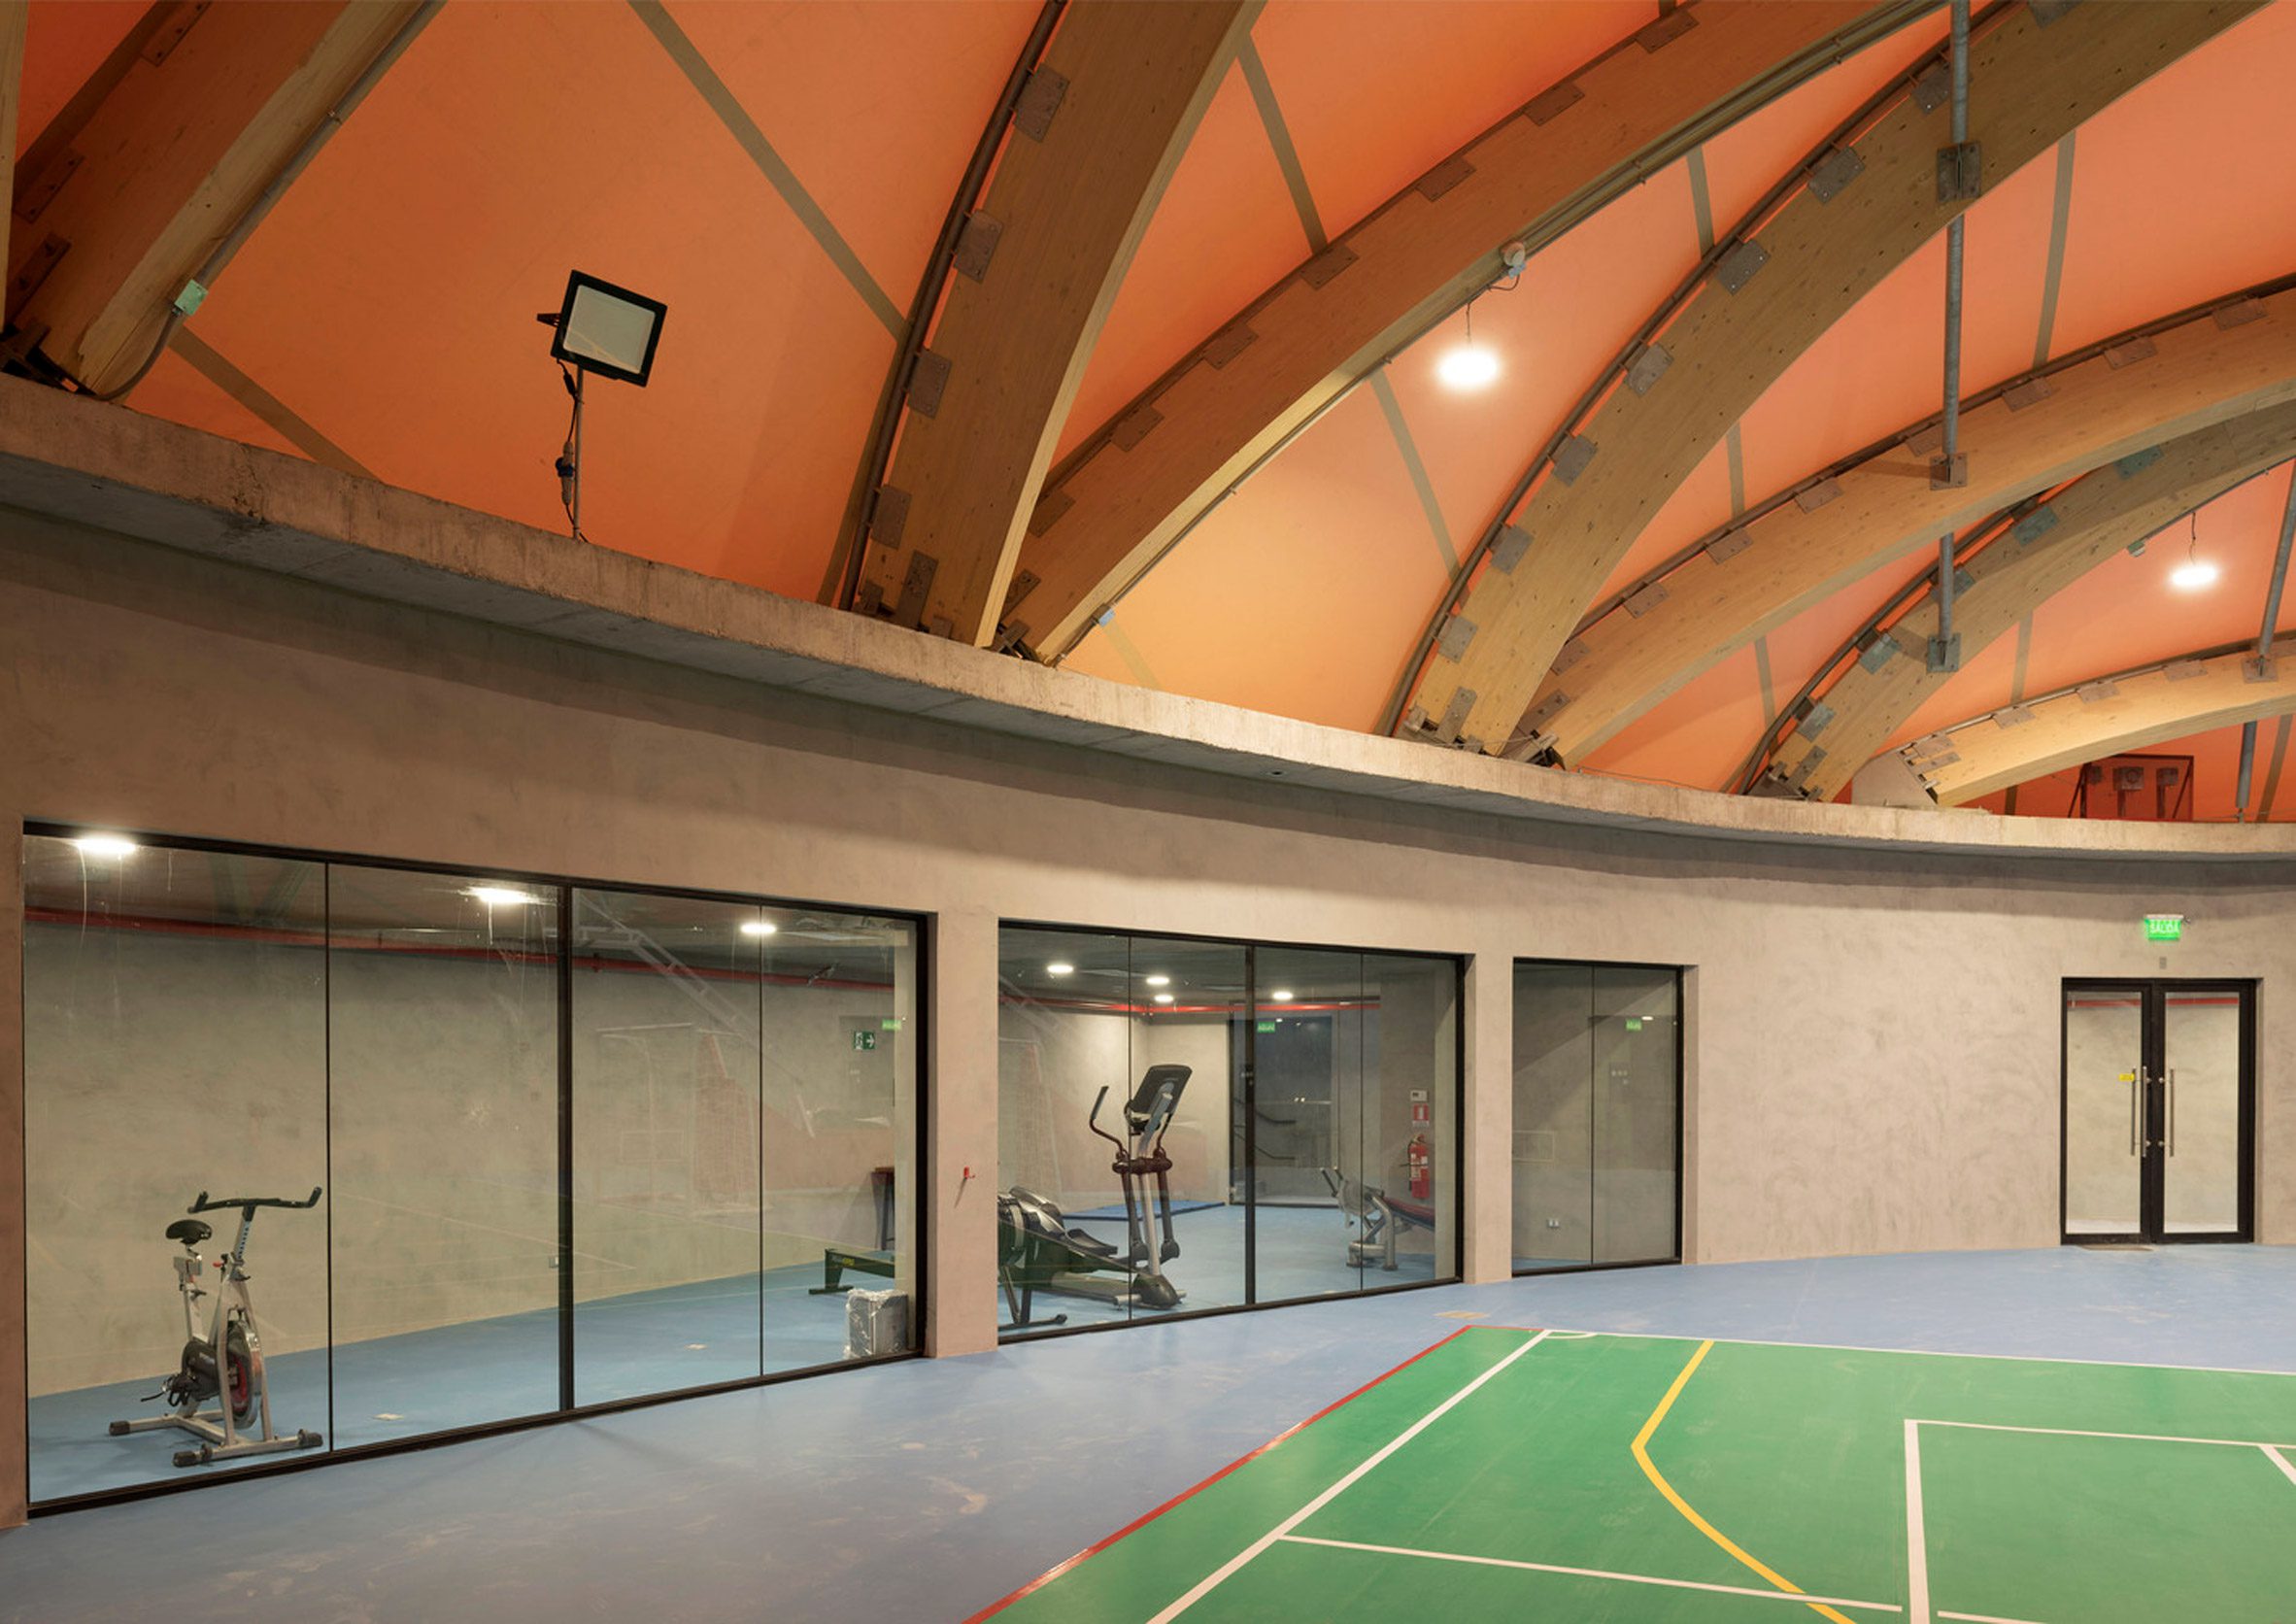 A small gym located around the sides of a basketball court